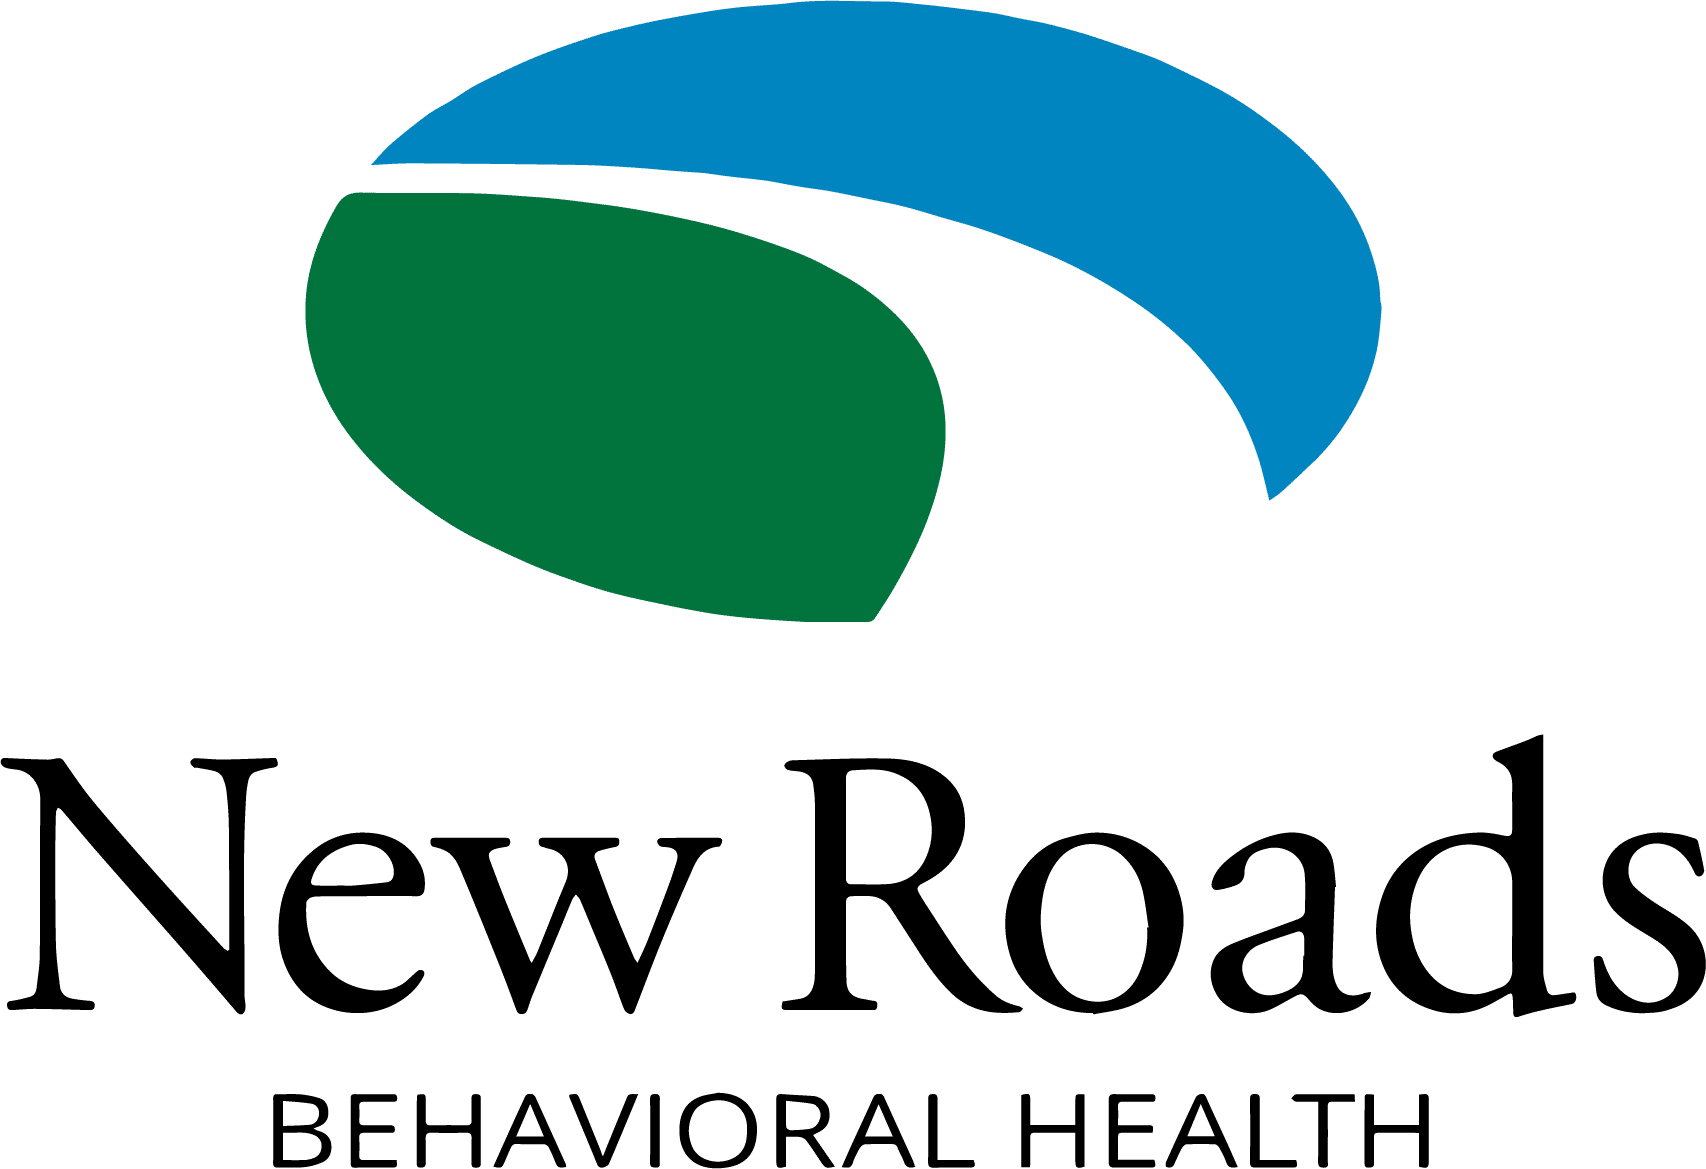 New Roads Behavioral Health | Gender Affirming Care: Why is it important?